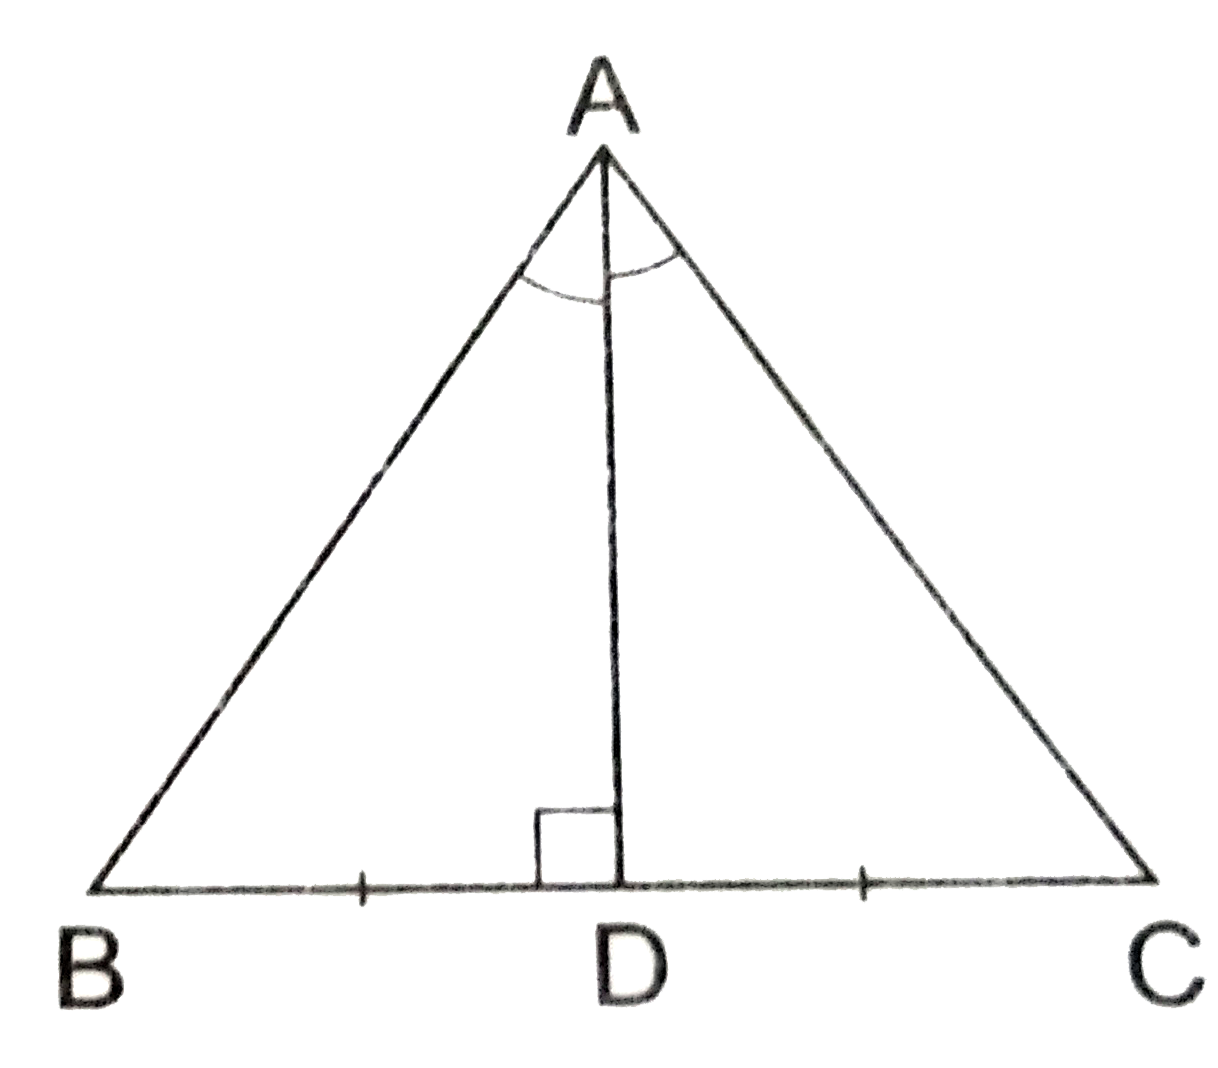 In an equilateral triagnle ABC, if AD  bot BC  then which of the following is true?